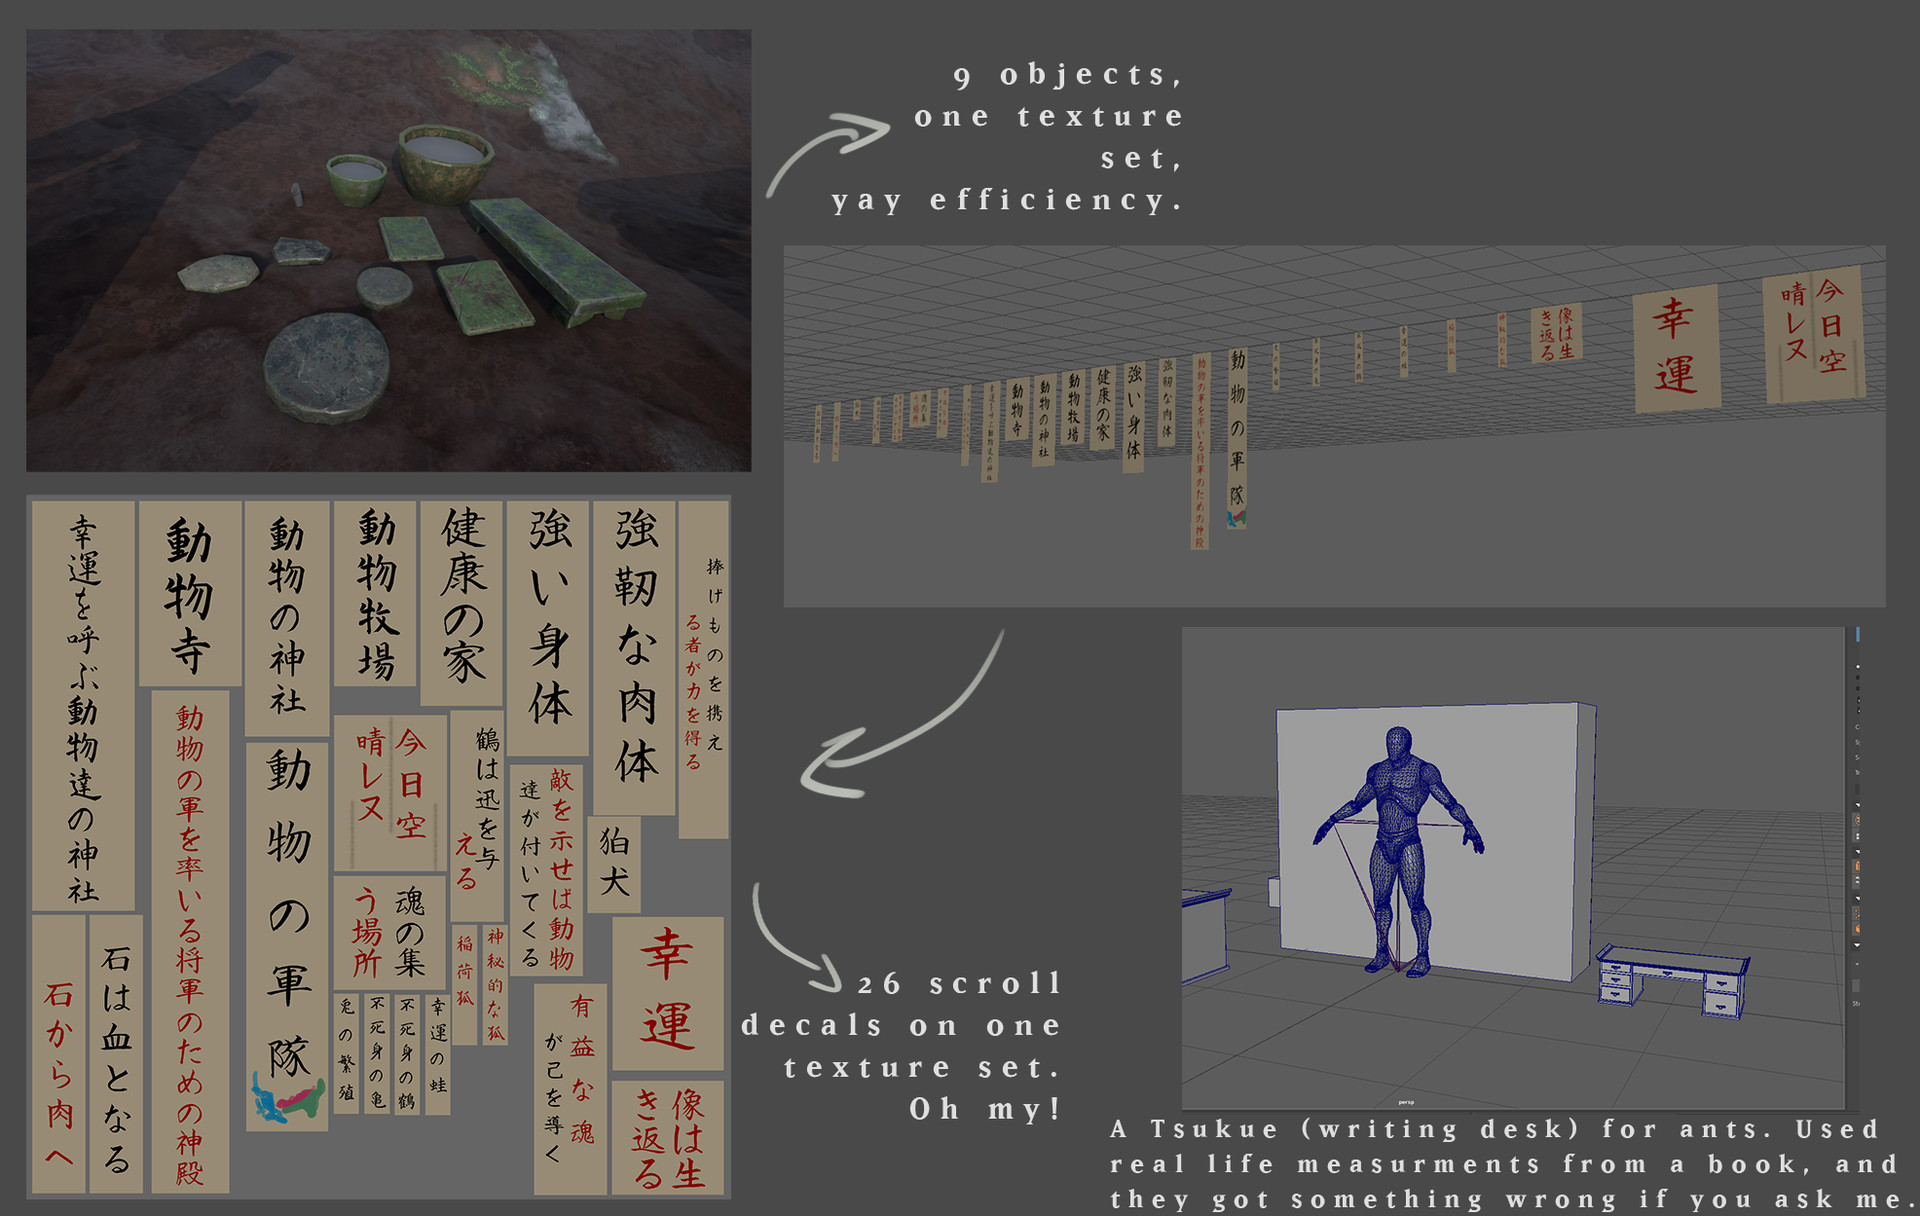 Four screenshots in total. First one is from Unreal 4 and shows 9 props that are stone surfaces, flat stones, water basins. Text next to those reads “9 objects, one texture set, yay efficiency.” Next is a Maya screenshot showing in line many fortune scrolls with Japanese writing. An arrow points to the texture used for that. A text next to that reads “26 scroll decals on one texture set. Oh my!”. To the right is another Maya screenshot. Shows an Unreal mannequin and next to it is a tiny tsukue writing desk. Text reads “A Tsukue (writing desk) for ants. Used real life measurements from a book, and they got something wrong if you ask me.”